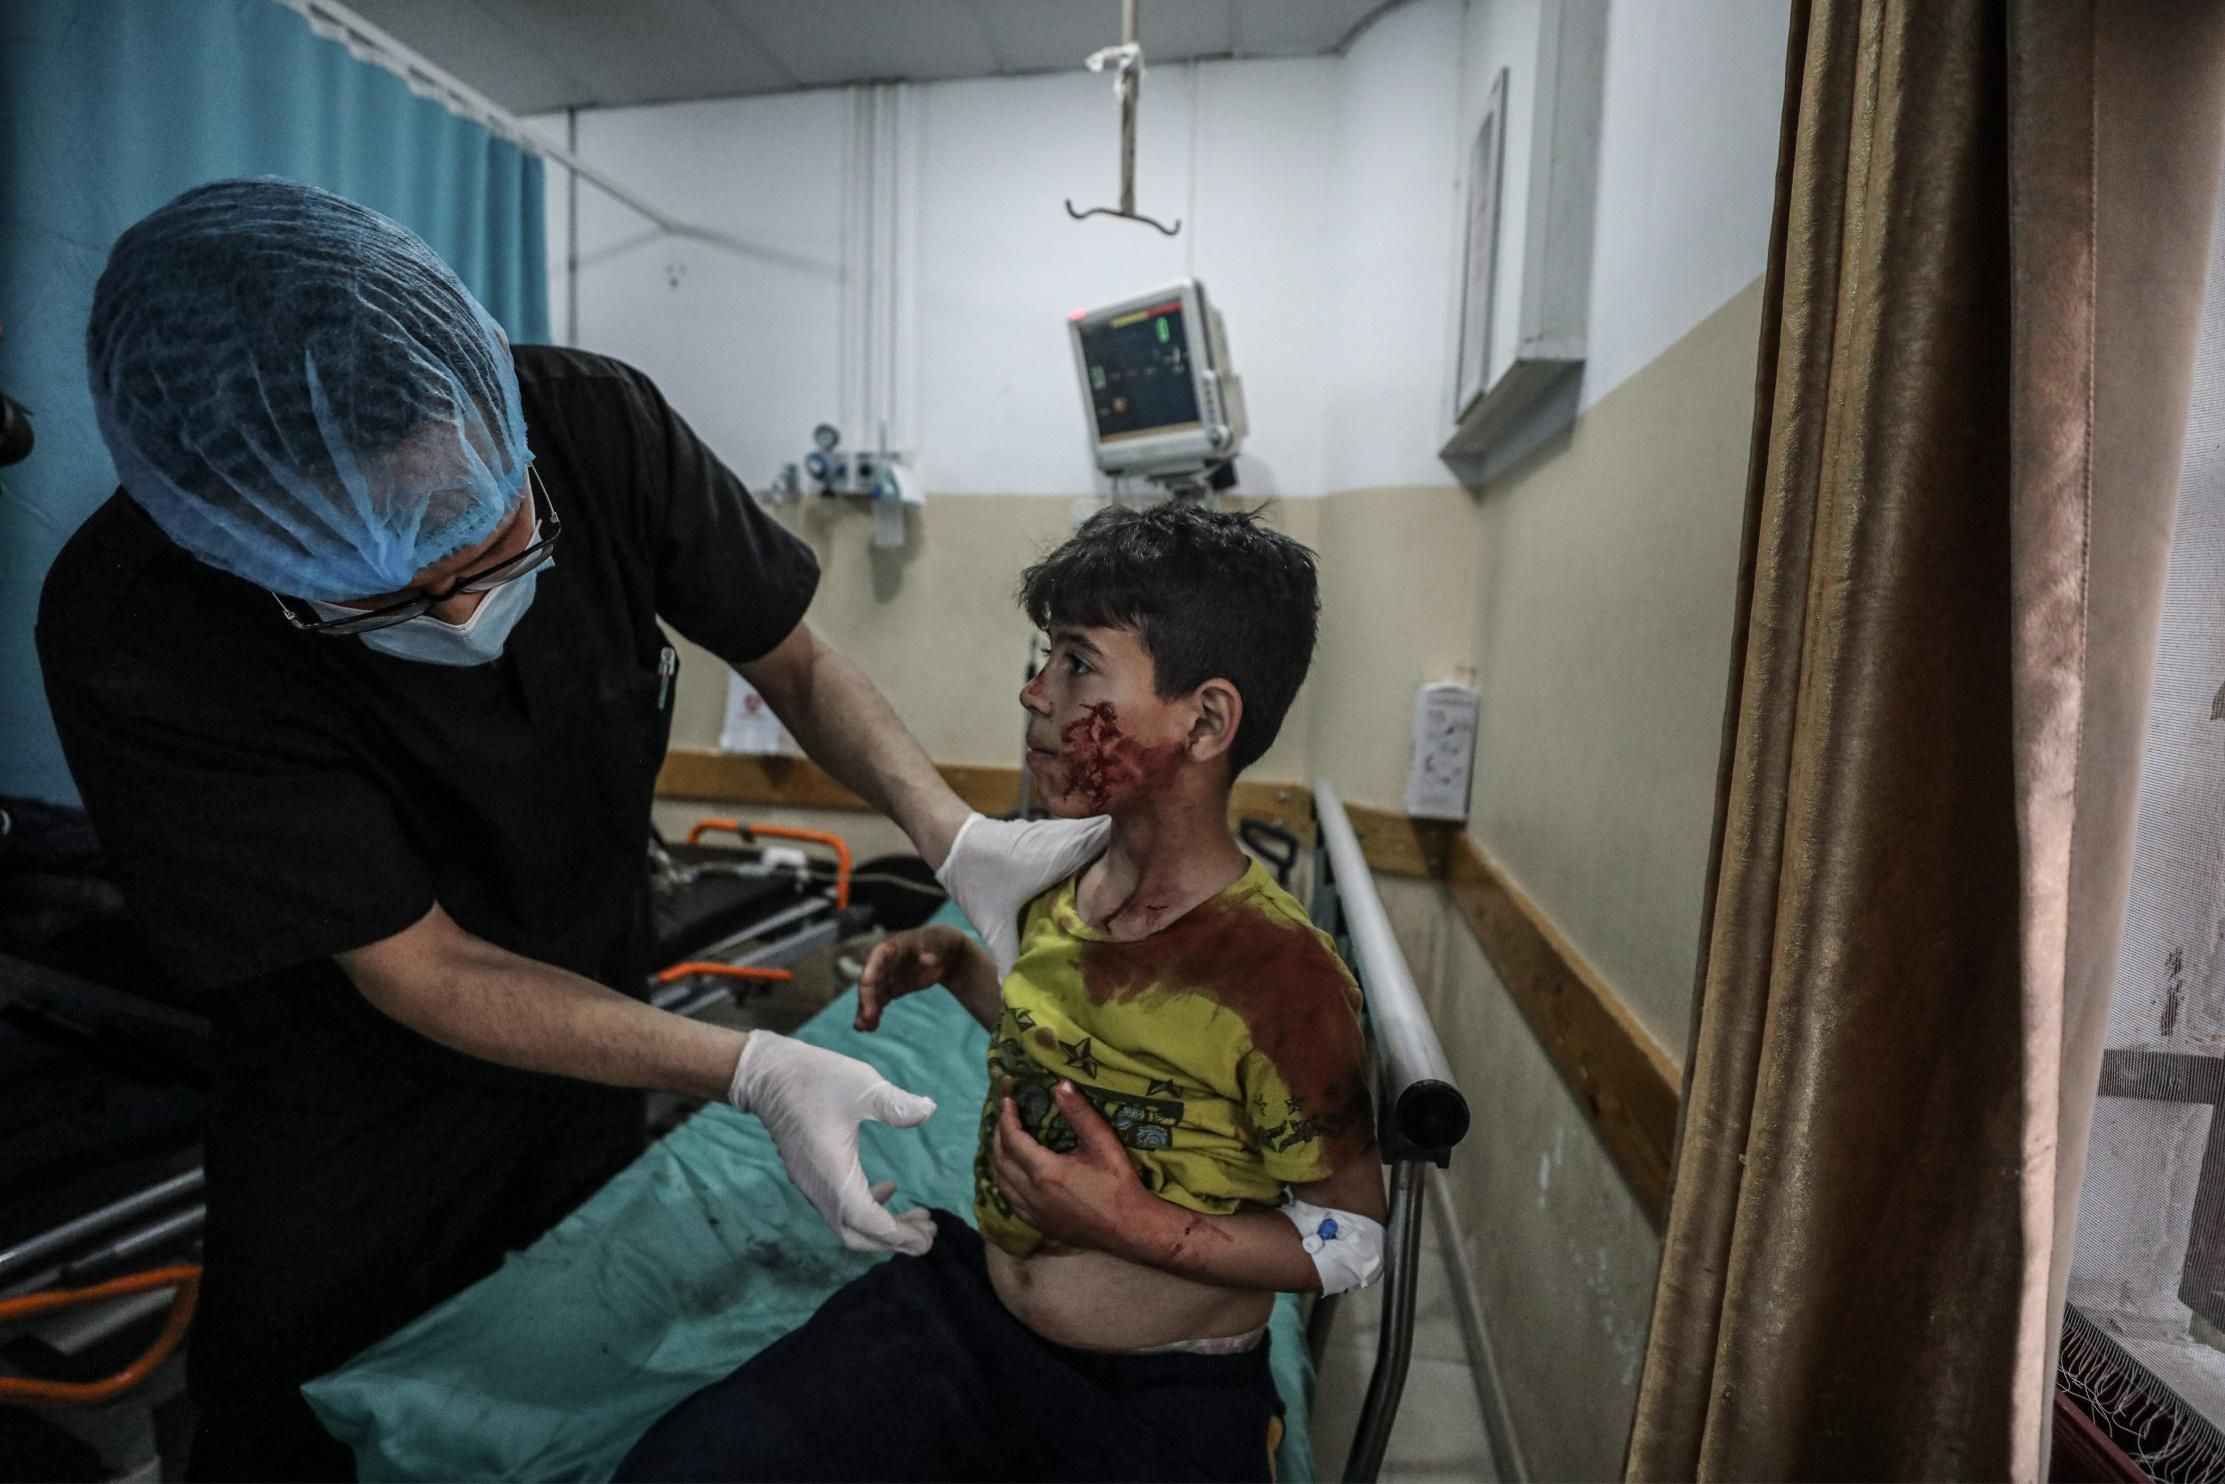 A wounded Palestinian child was brought to Indonesian Hospital to receive medical treatment after Israeli airstrikes in the Gaza Strip on May 10, 2021 in Beit Lahia, Gaza. At least 20 Palestinians, including nine children, were killed, according to local health authorities. (Photo: Ali Jadallah/Anadolu Agency via Getty Images)